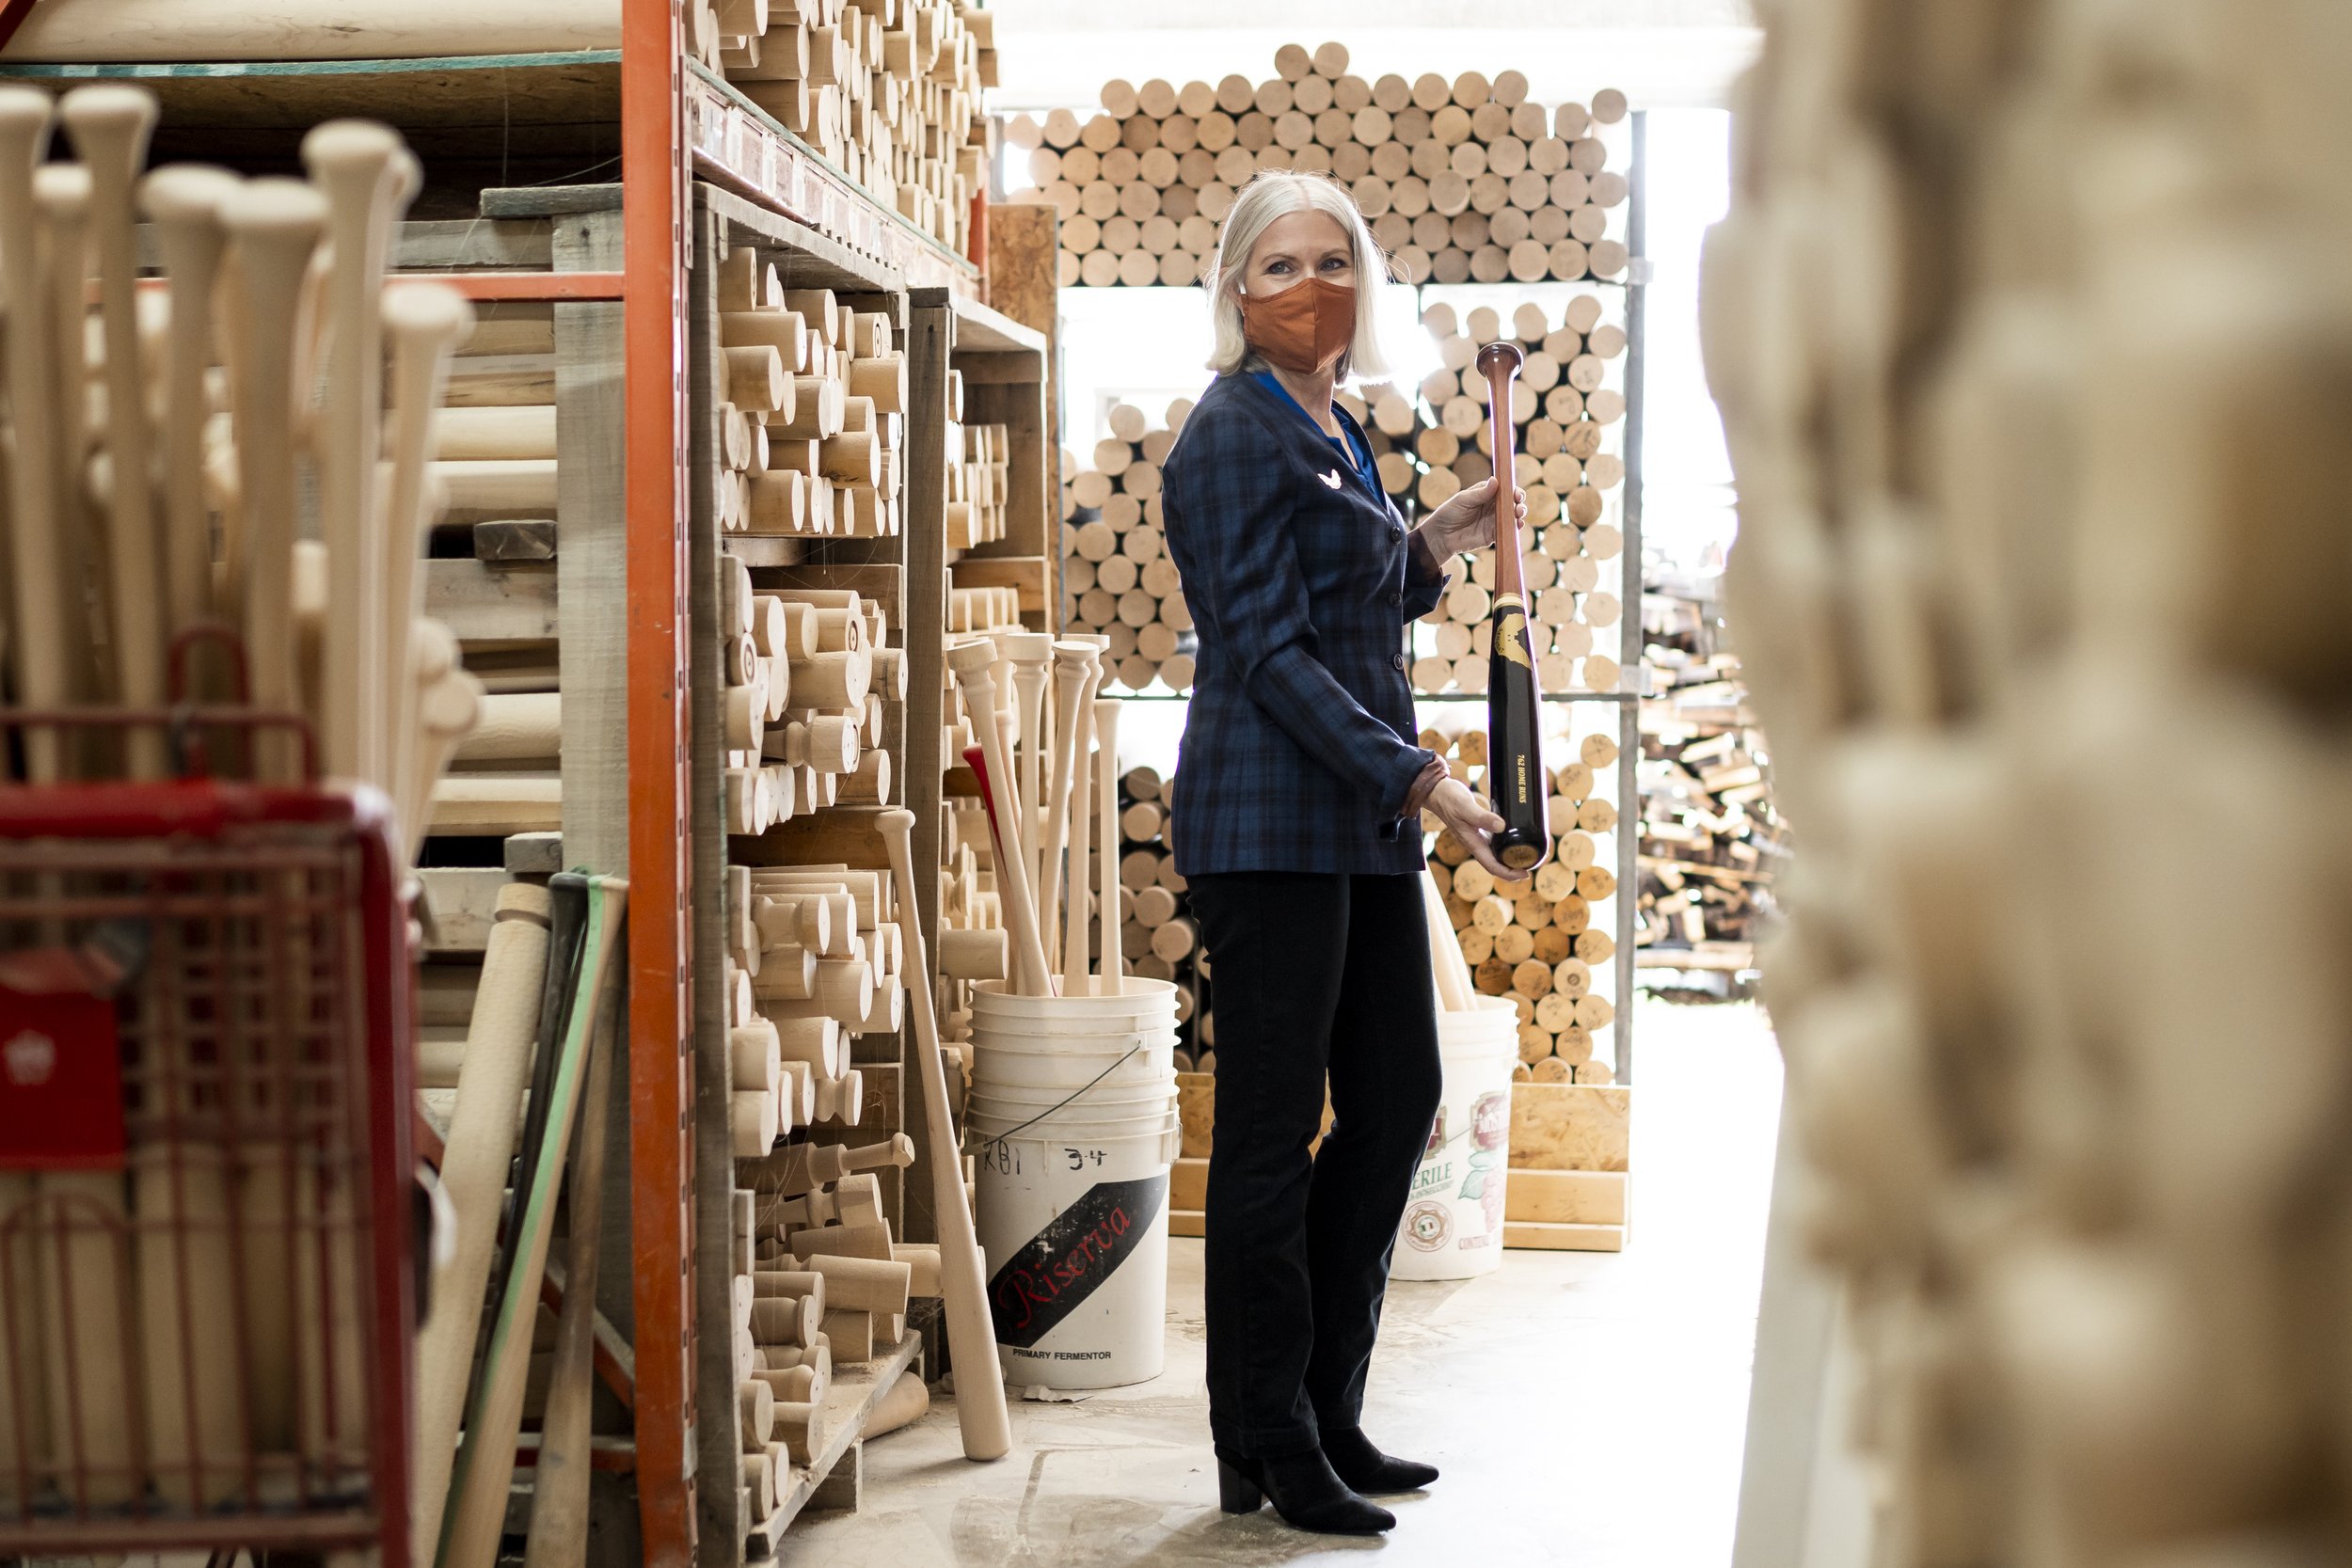  The president and co-owner of Sam Bat, Arlene Anderson is photographed at the Sam Bat facility in Carleton Place, Ontario. Sam Bat is known as the original maple bat company that produced the first MLB approved maple baseball bat. Players such as Ba